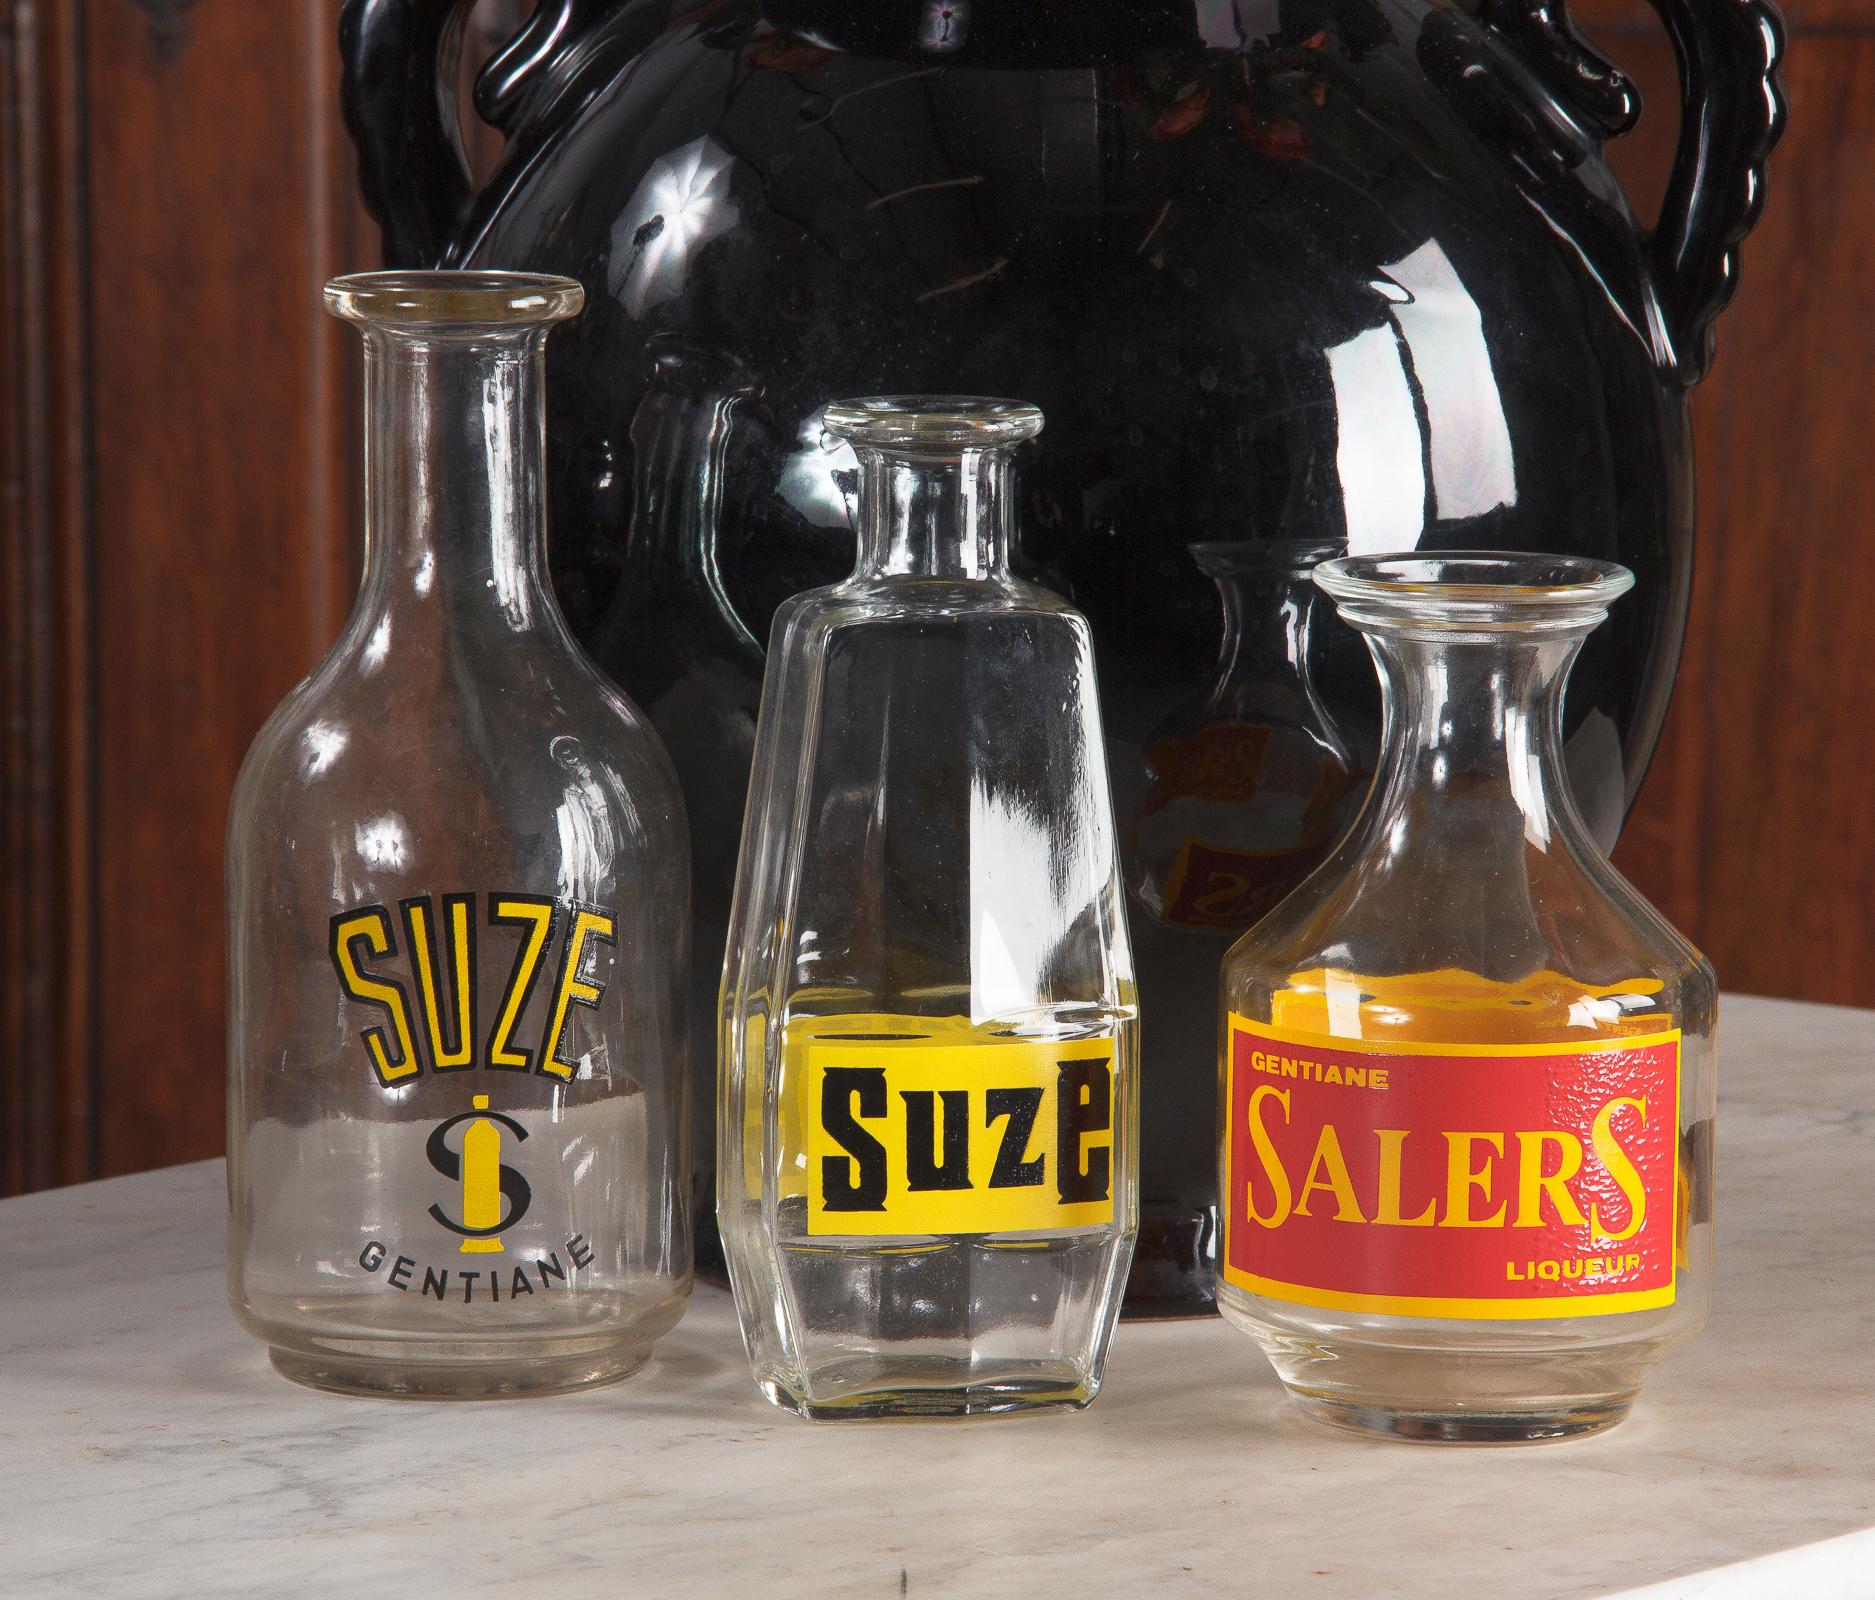 A glass carafe advertising Suze, a French gentian flowers liqueur. These carafes were offered to bars and restaurants as a promotion and used to served water to mix with the liqueur.